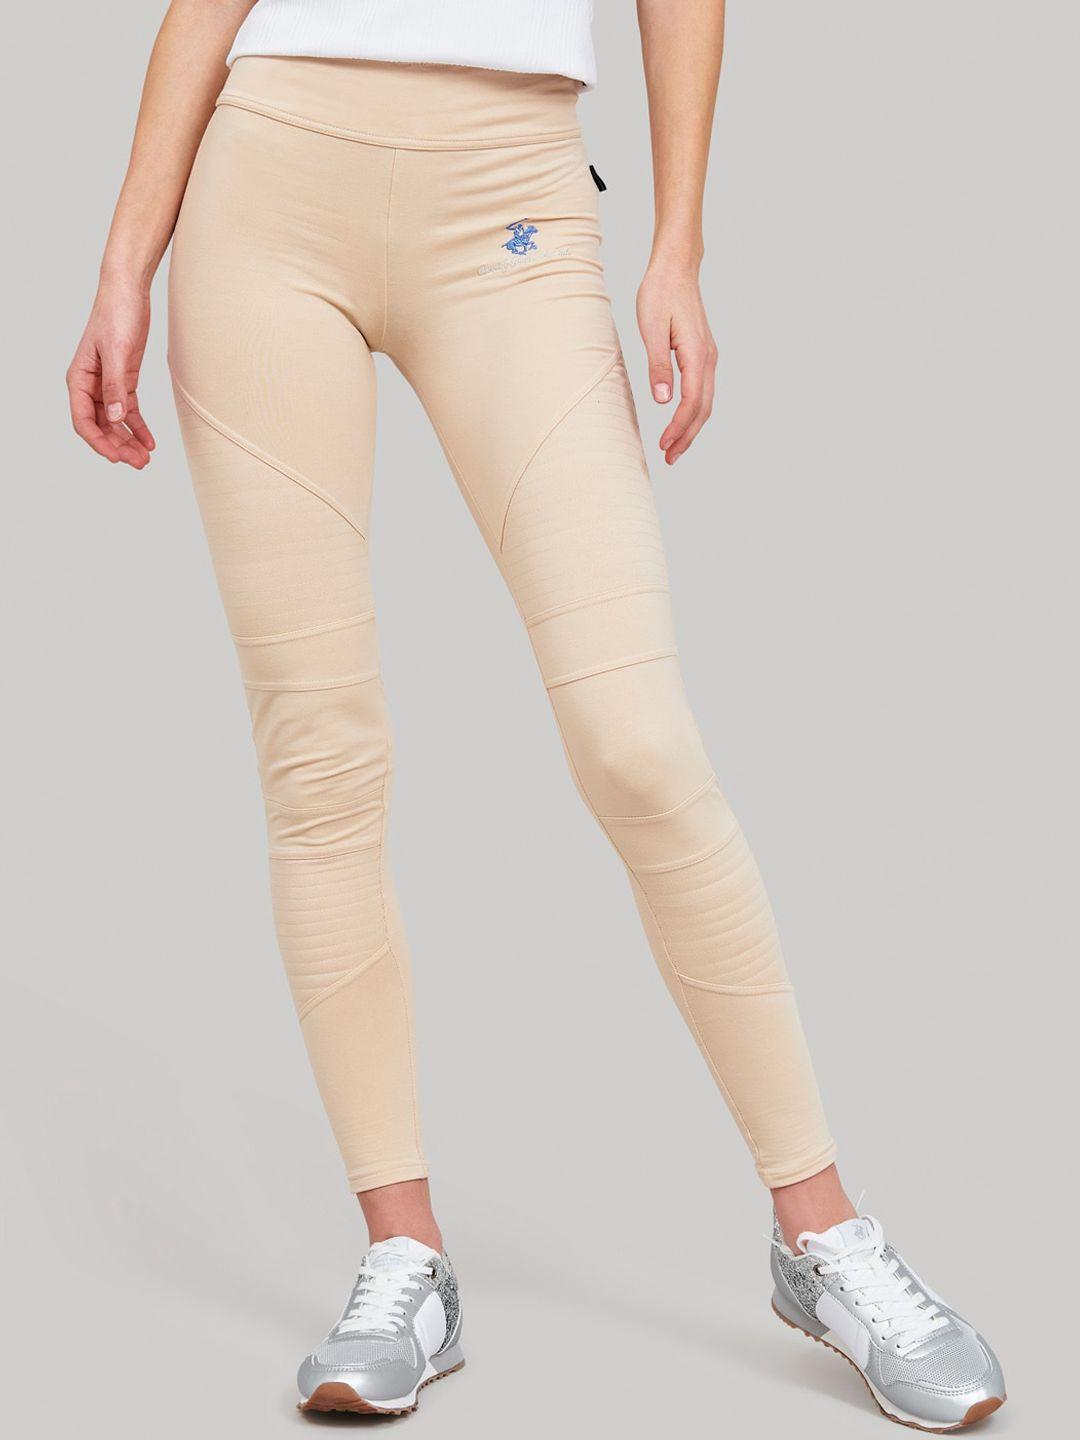 beverly hills polo club women beige solid ankle length leggings